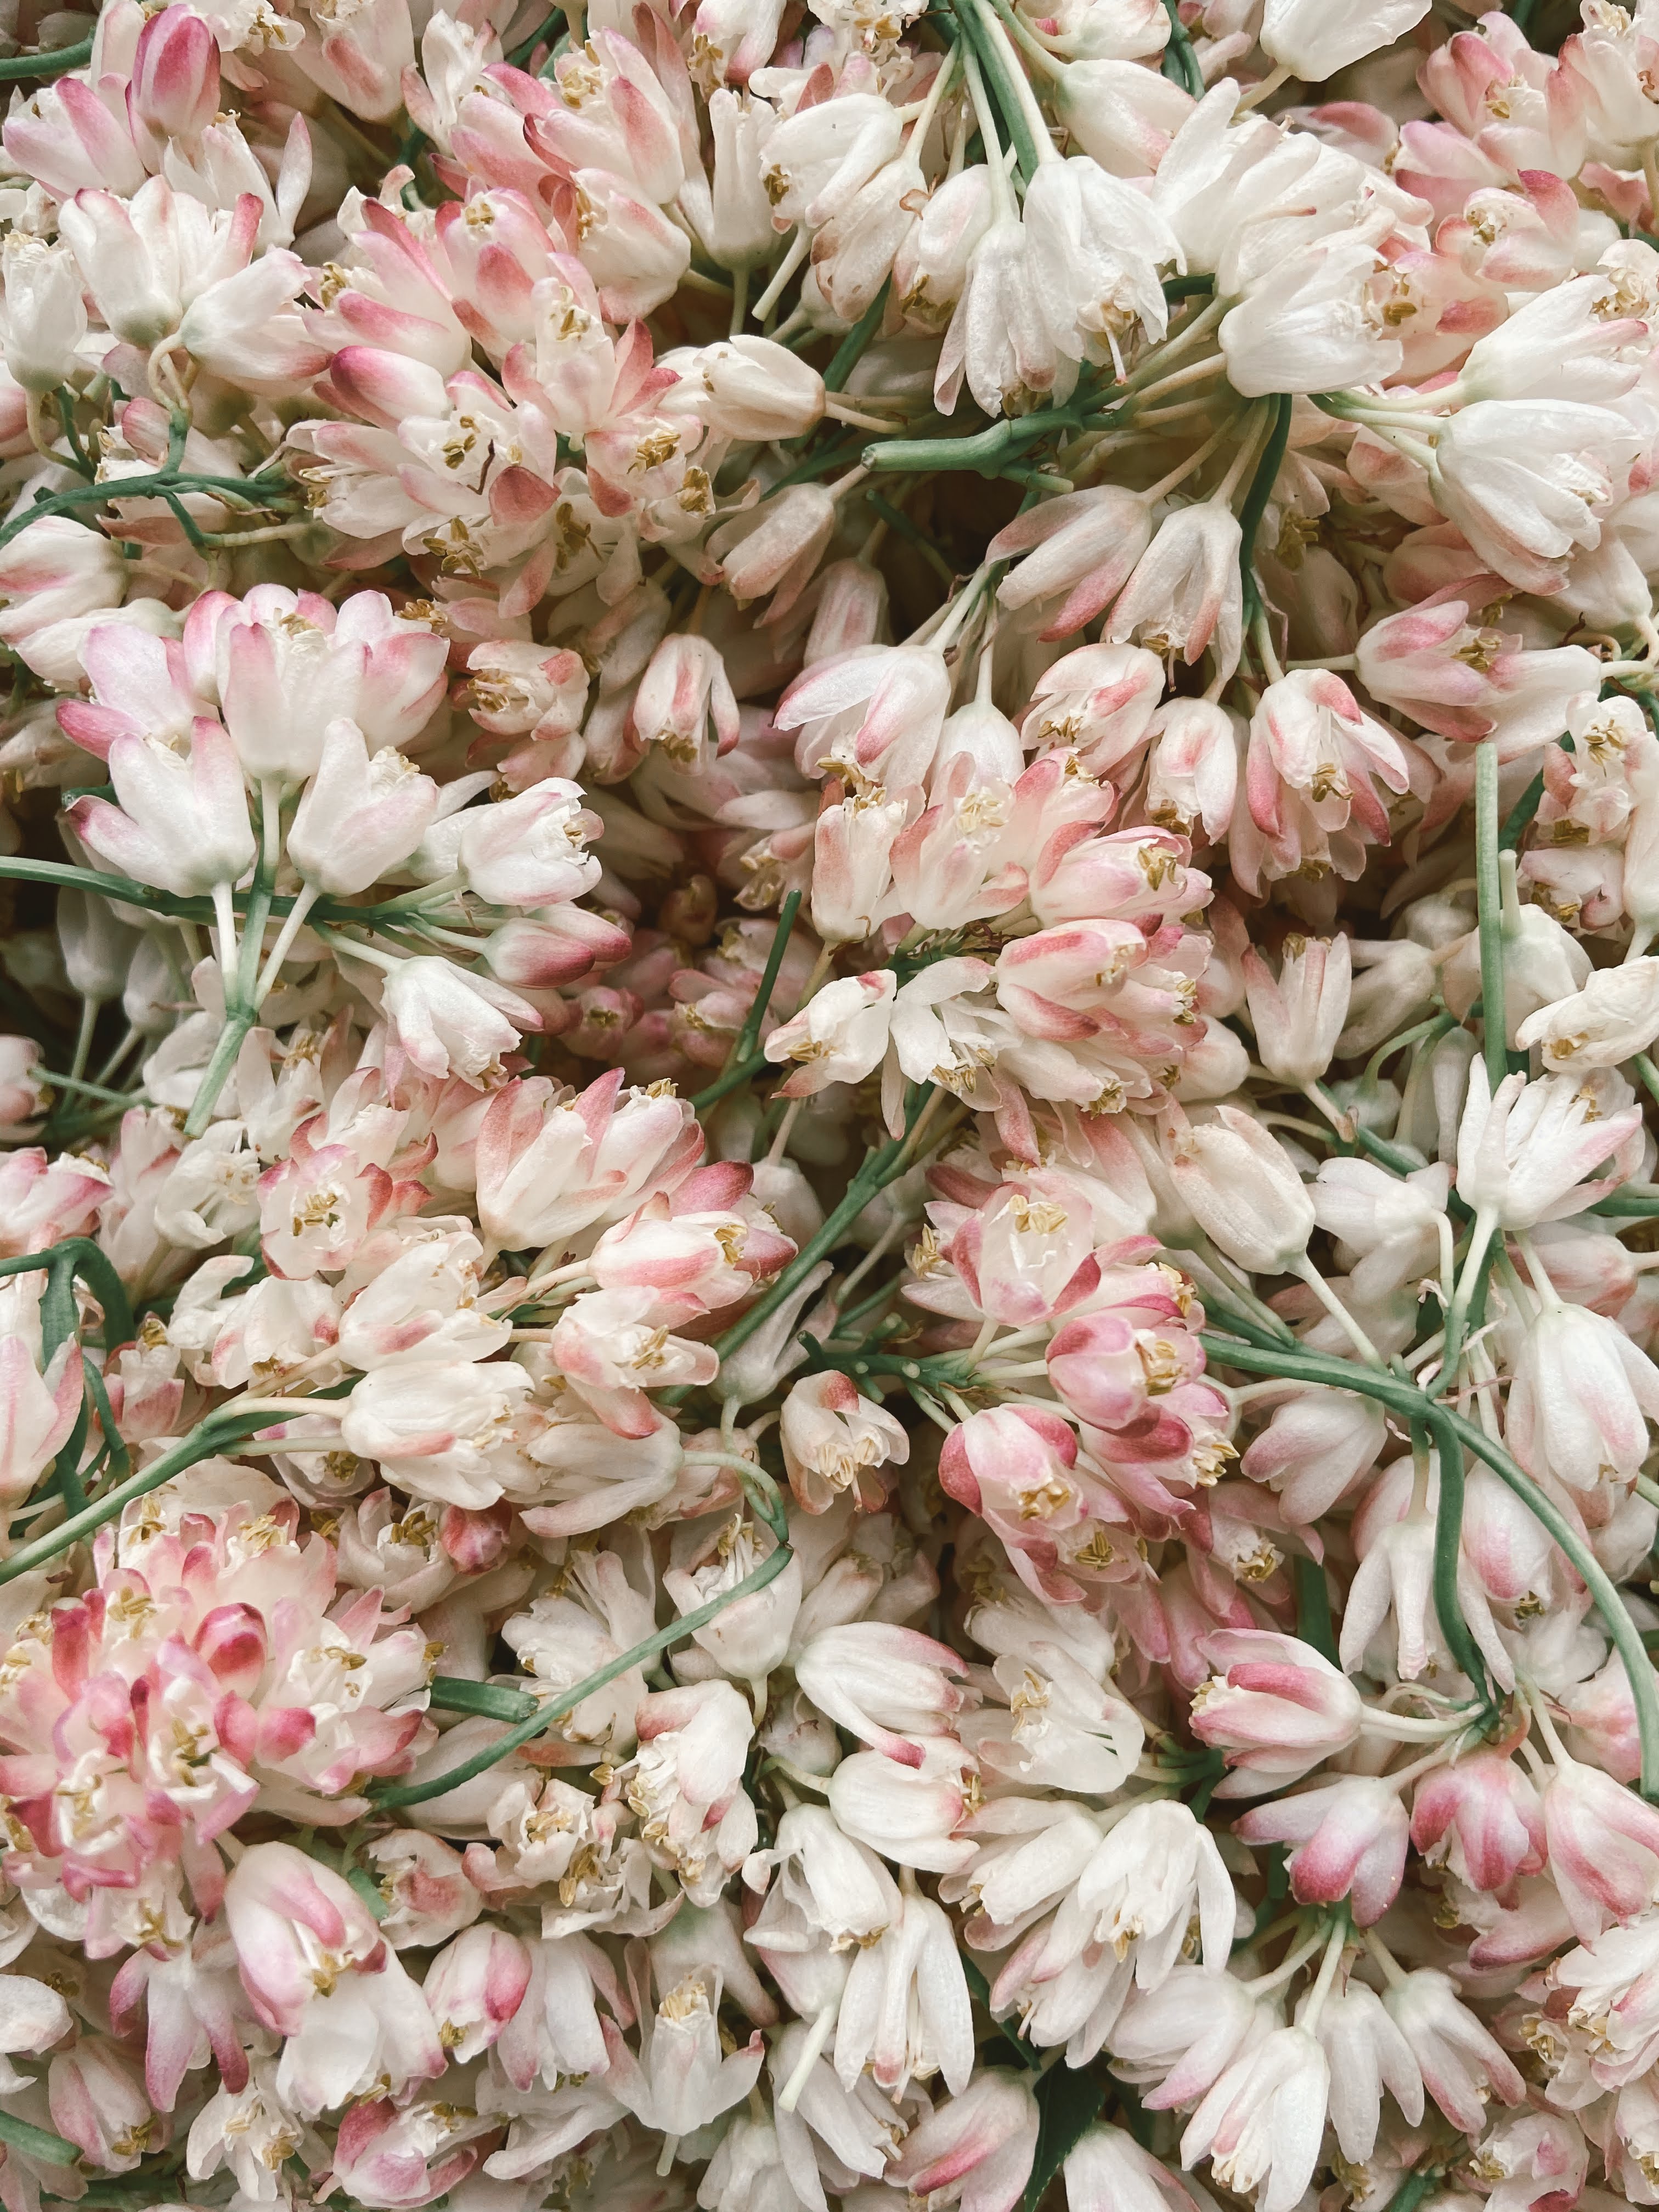 Delicate white and pink flowers heaped together · Free